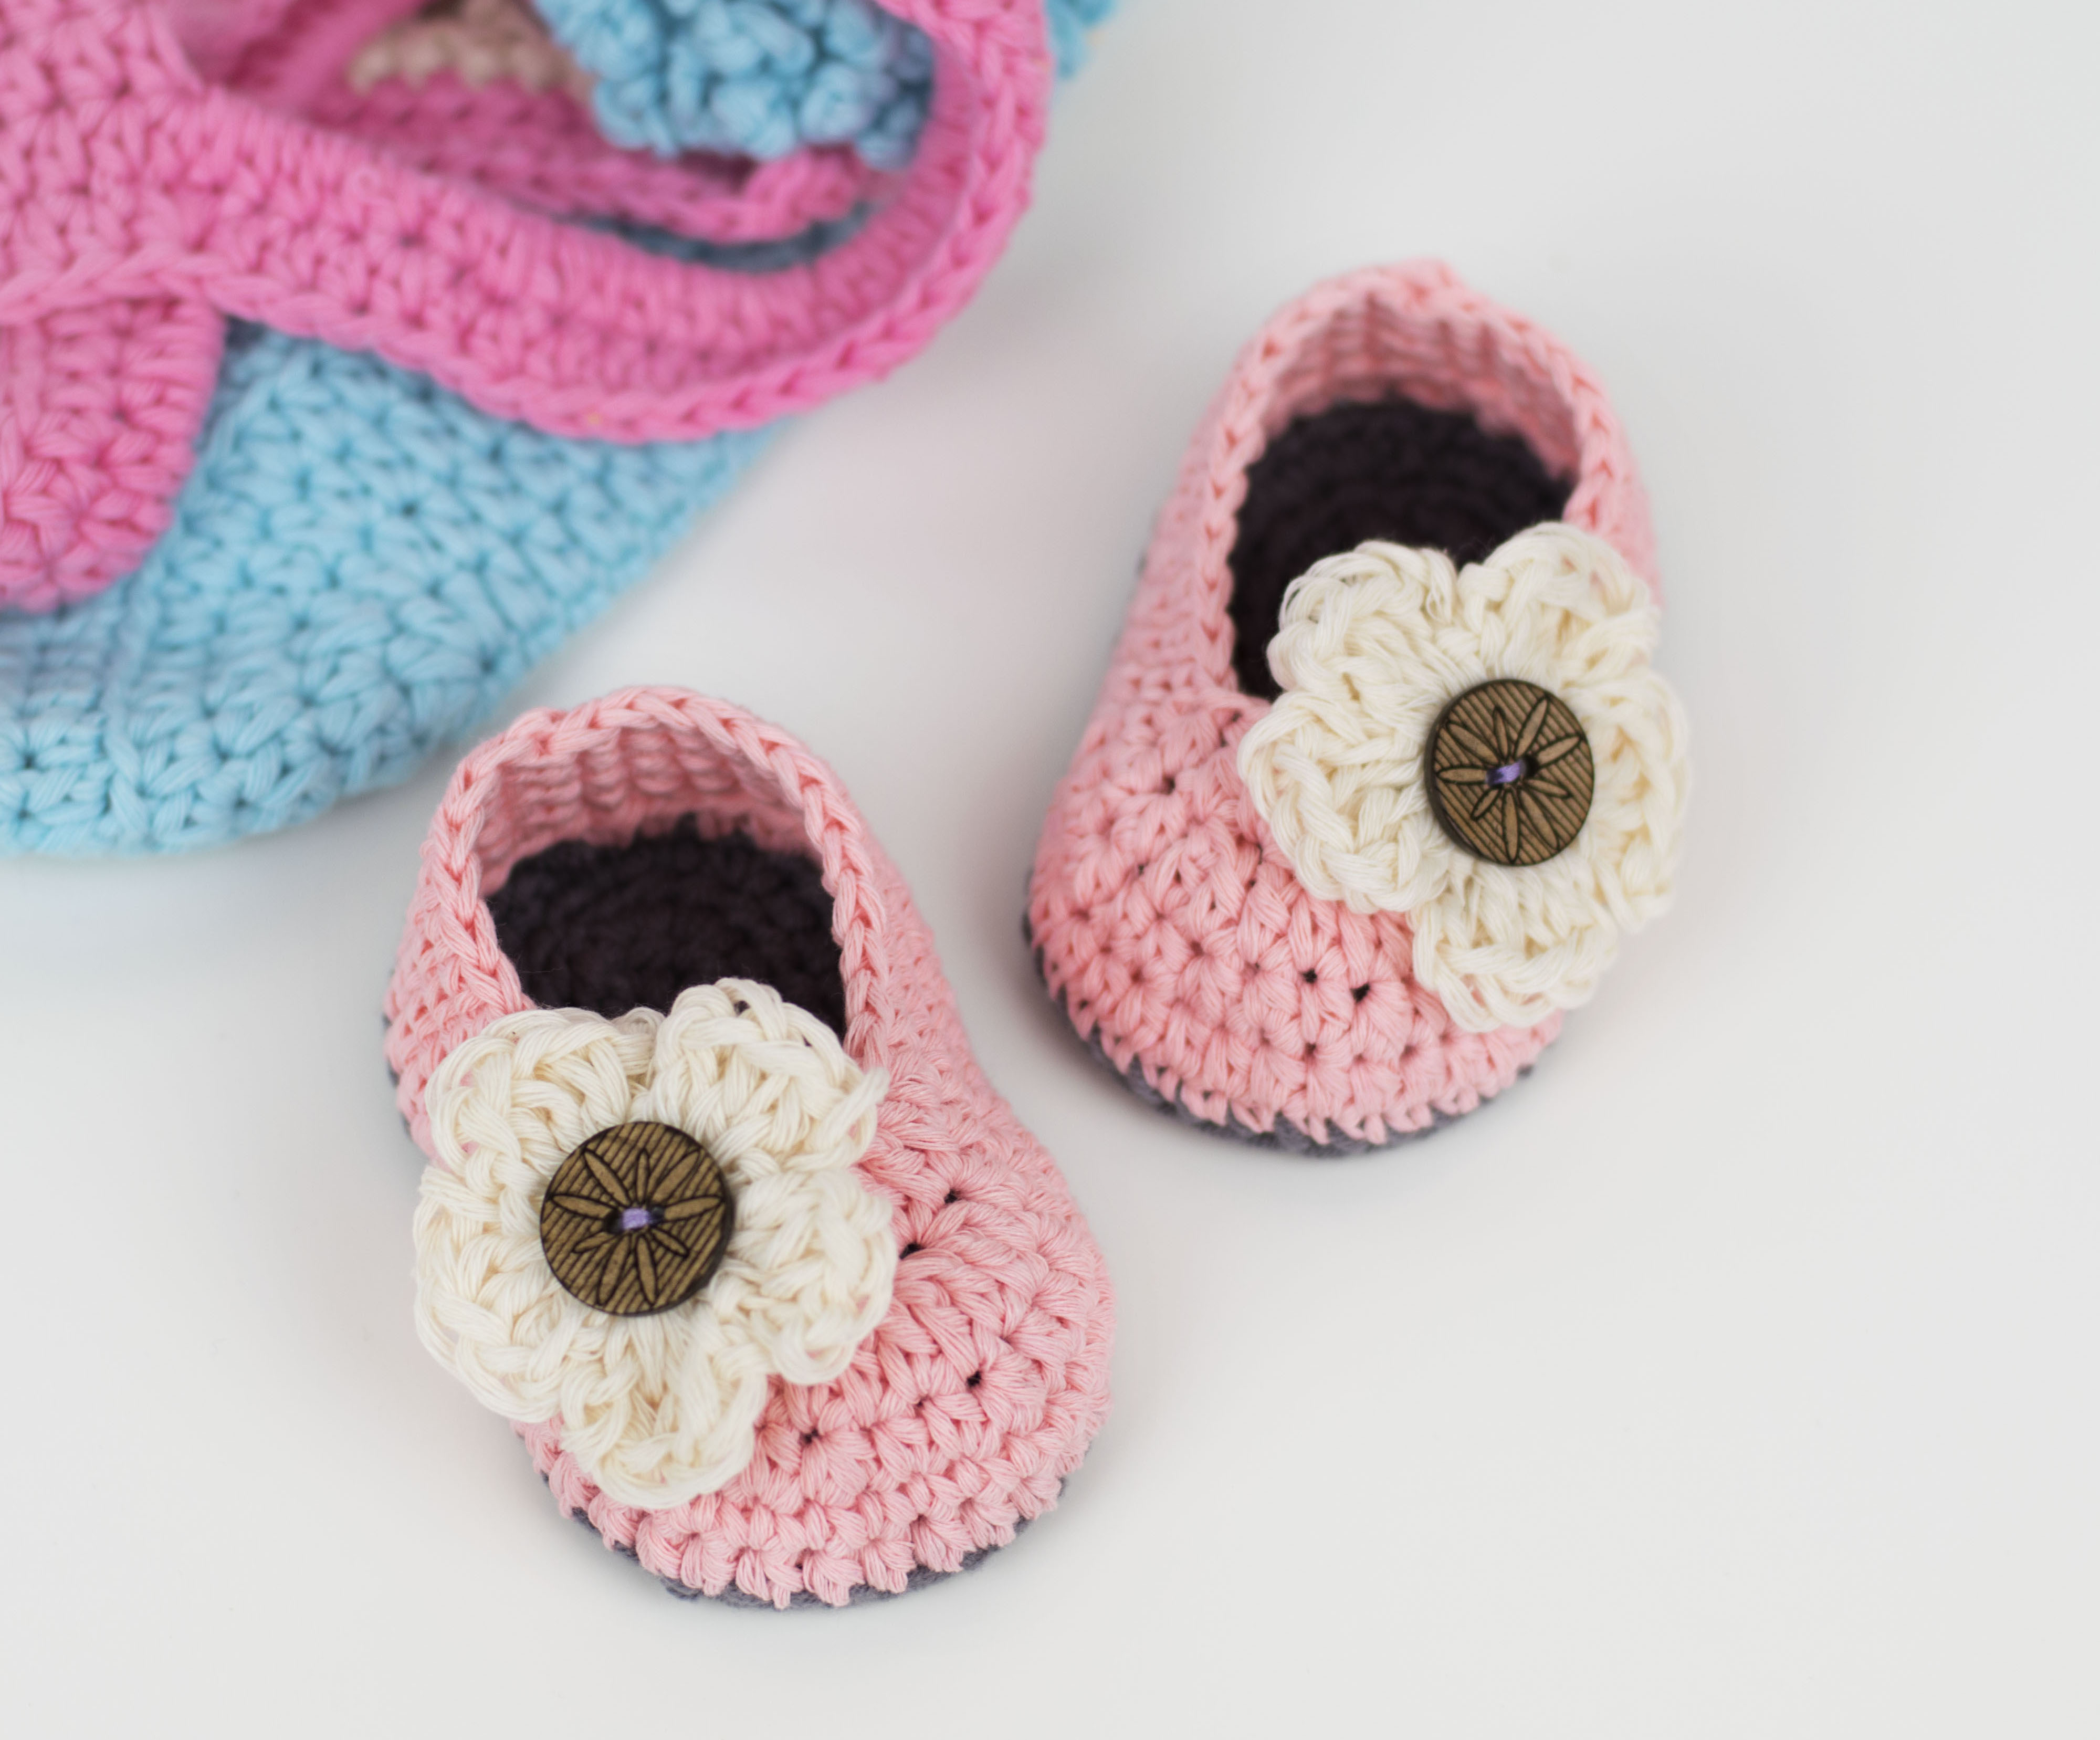 Free Pattern For Baby Sandals To Crochet Free Pattern Crochet Ba Booties With Flower Cro Patterns